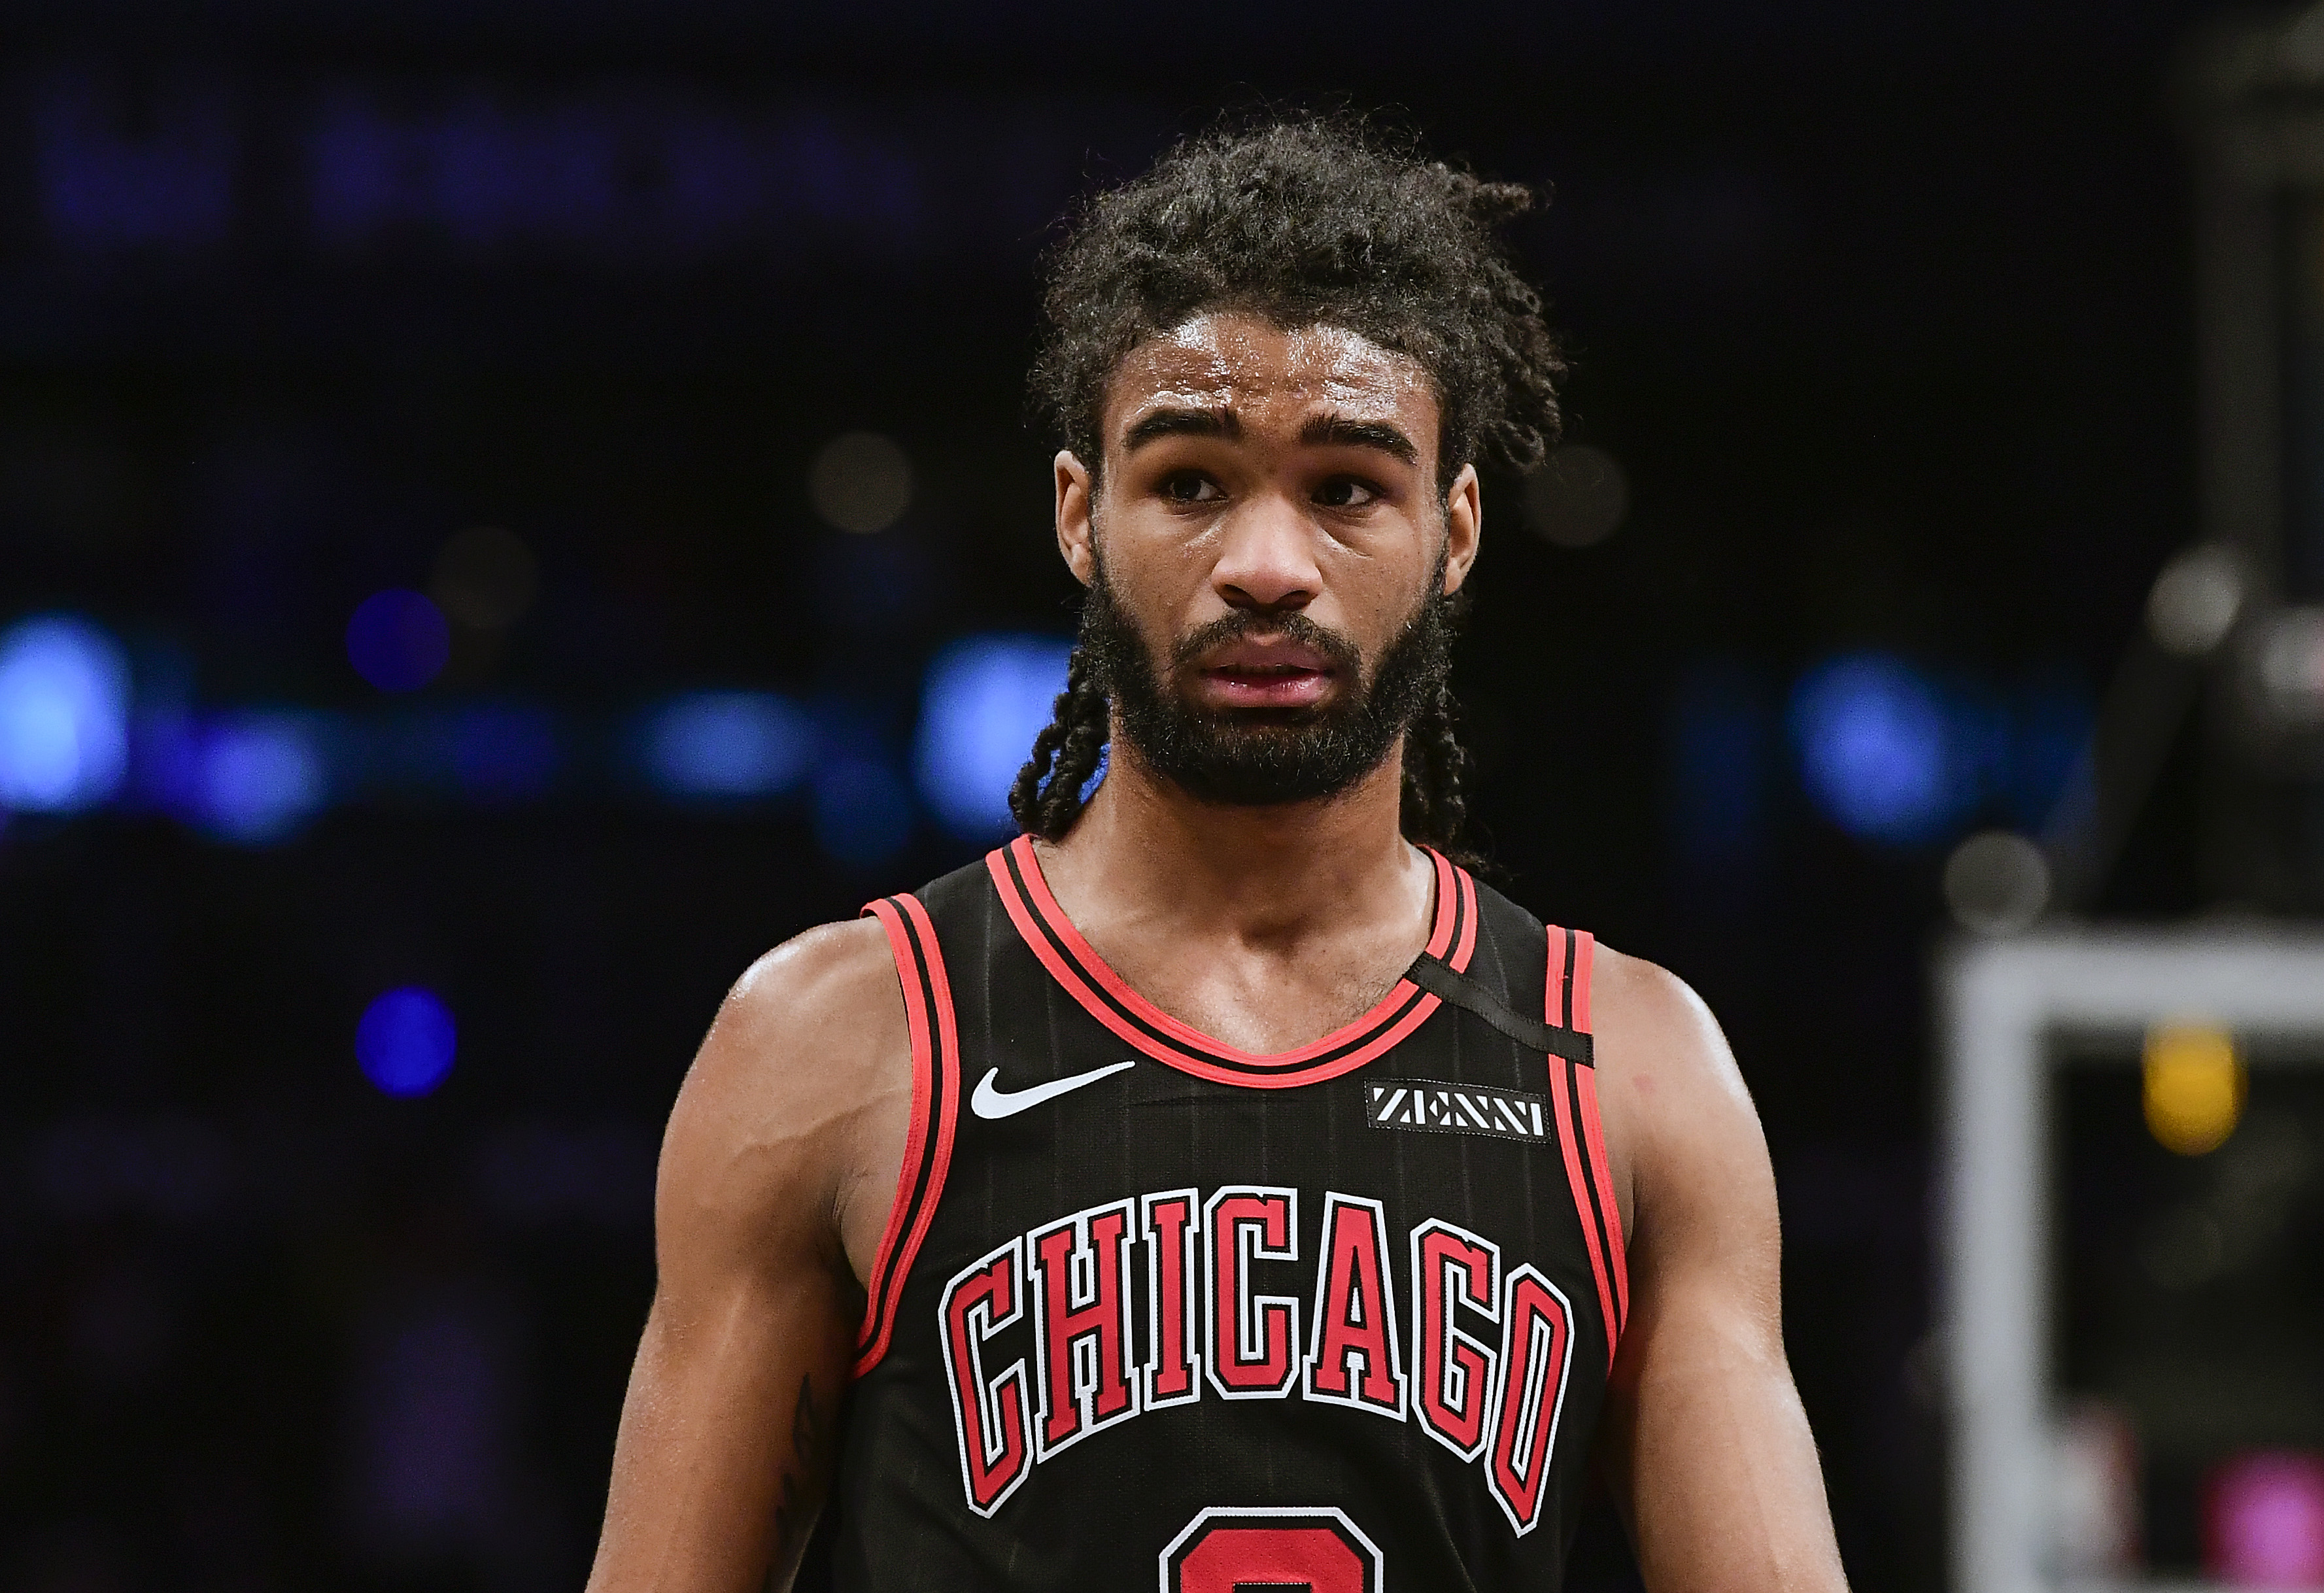 Bulls guard Coby White shocks fans with bald head pics on